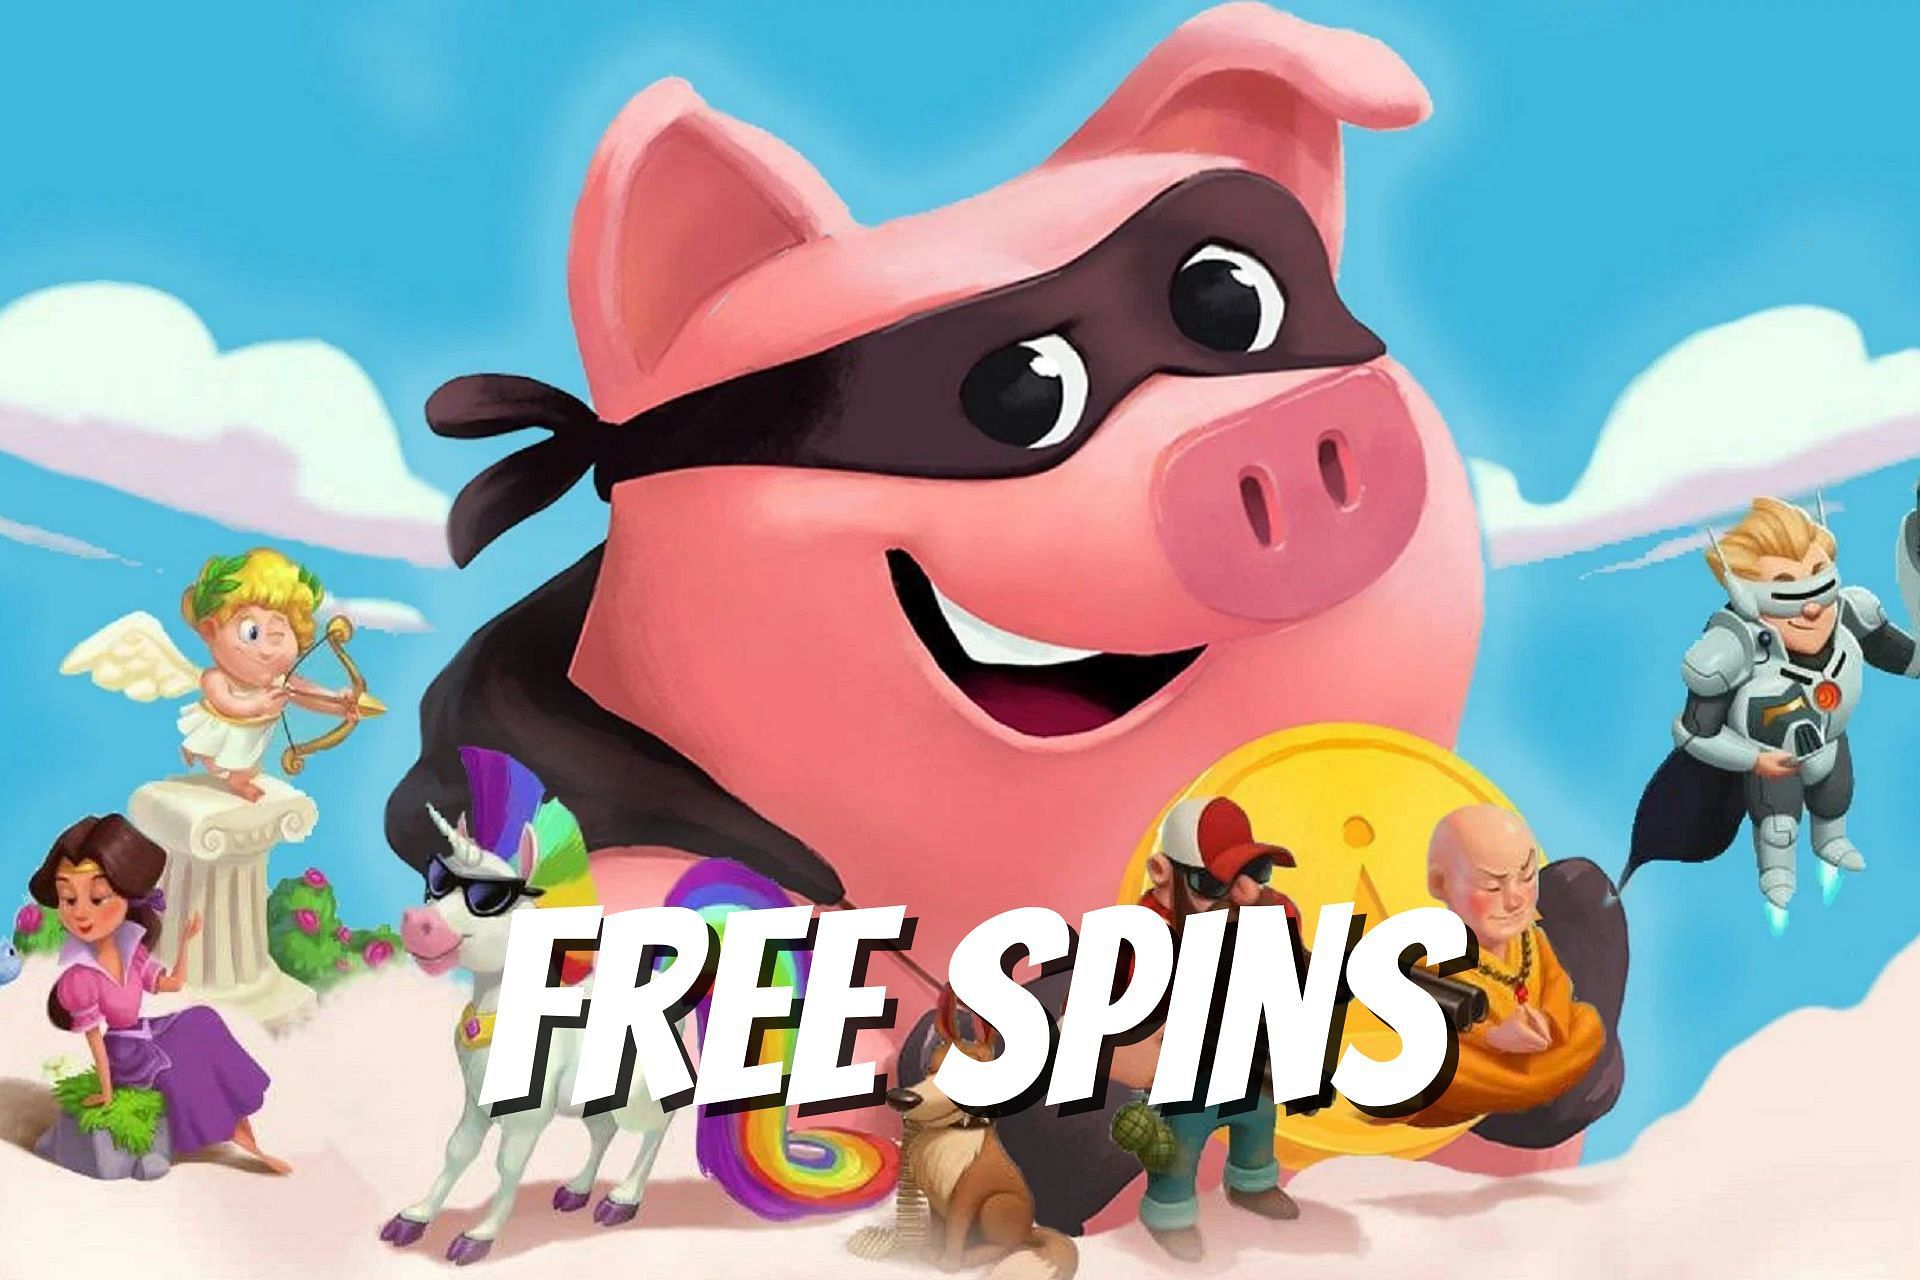 Coin Master Free Spin Link (December 27): Get Free Spins